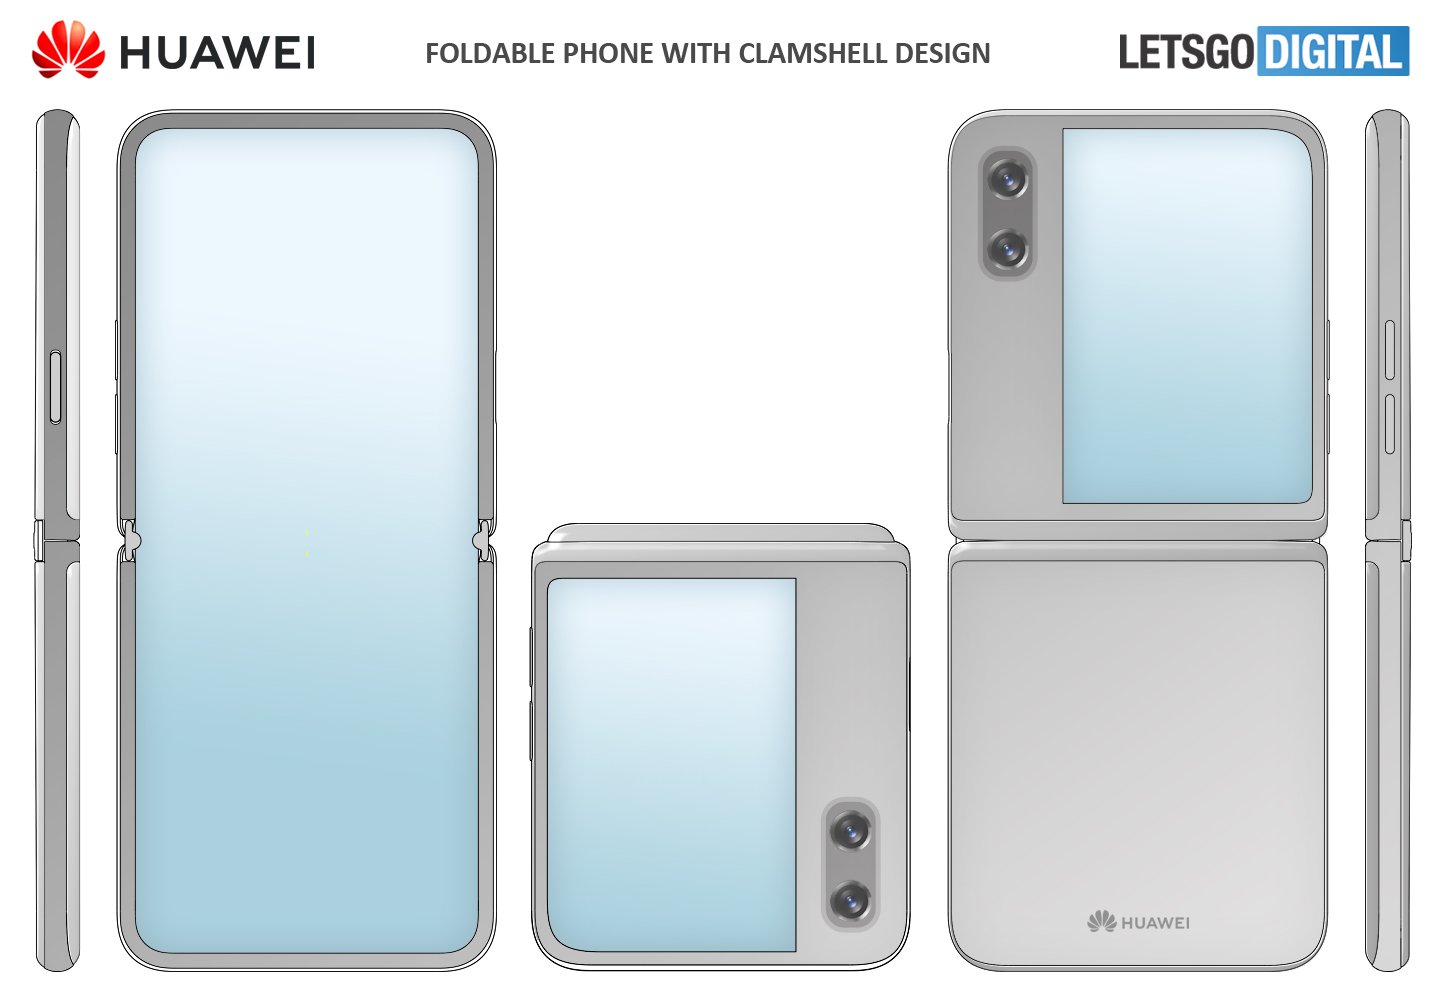 Huawei patents a clamshell foldable smartphone design with a larger cover display